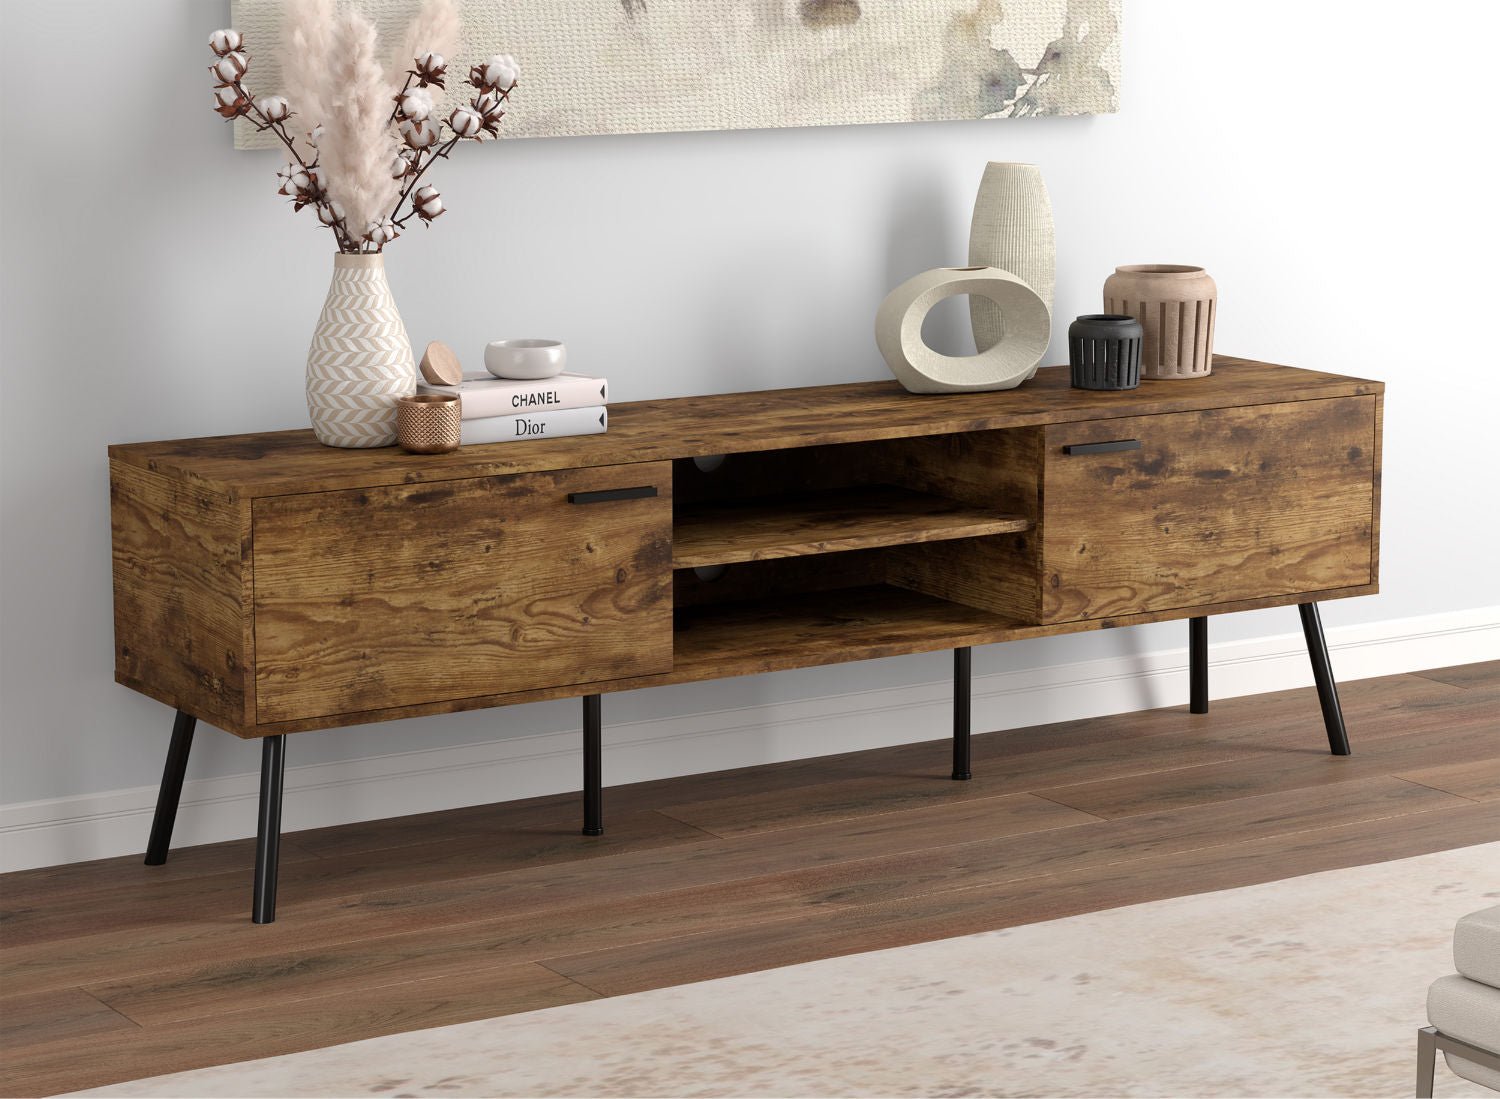 Tv Stand Brown Reclaimed Wood 2 Closed Doors 2 Shelves - DecoElegance - Entertainment Center and TV Stand